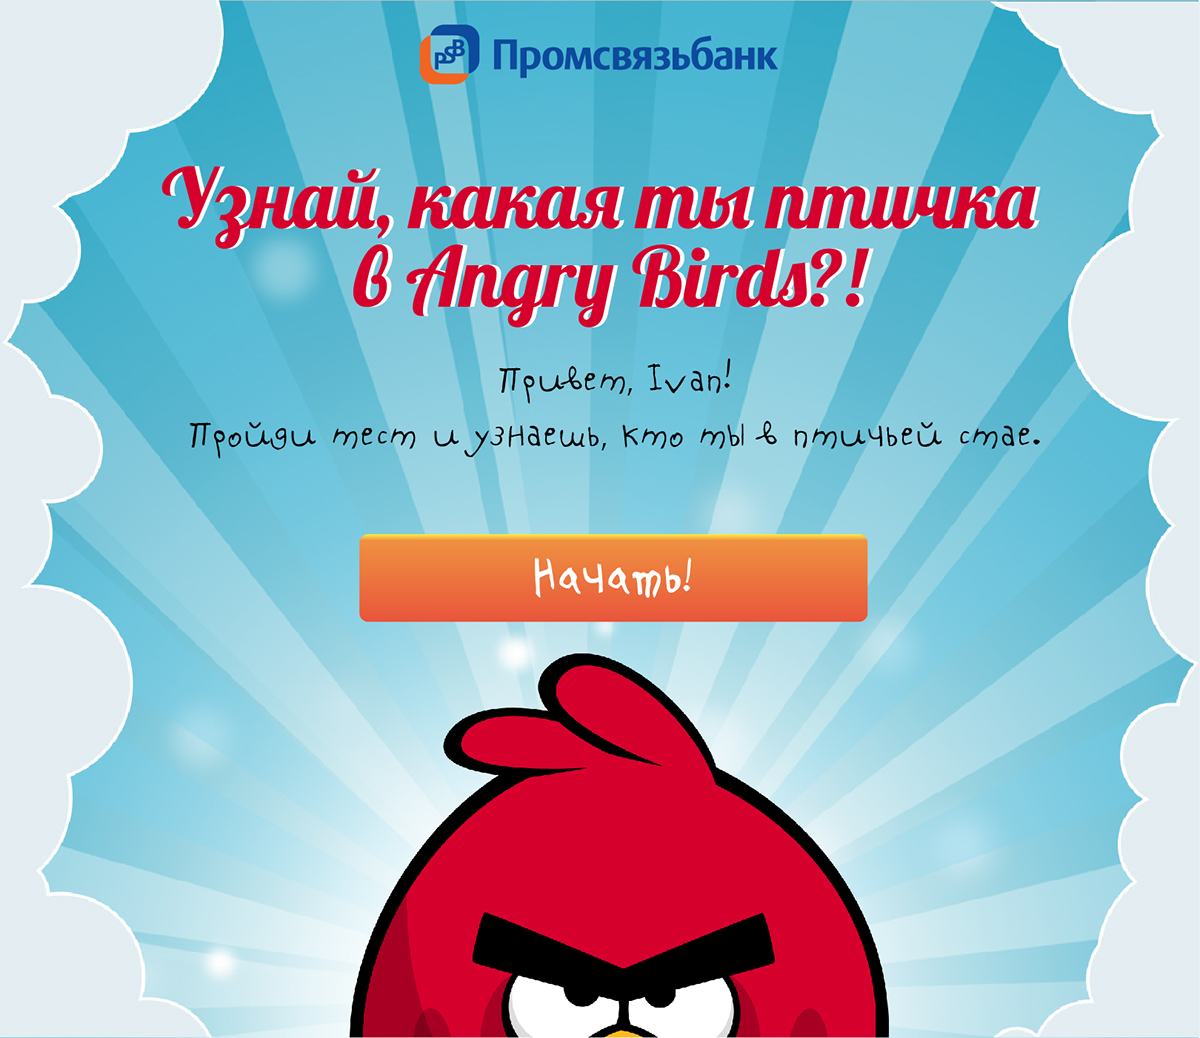 psb angry birds Bank test